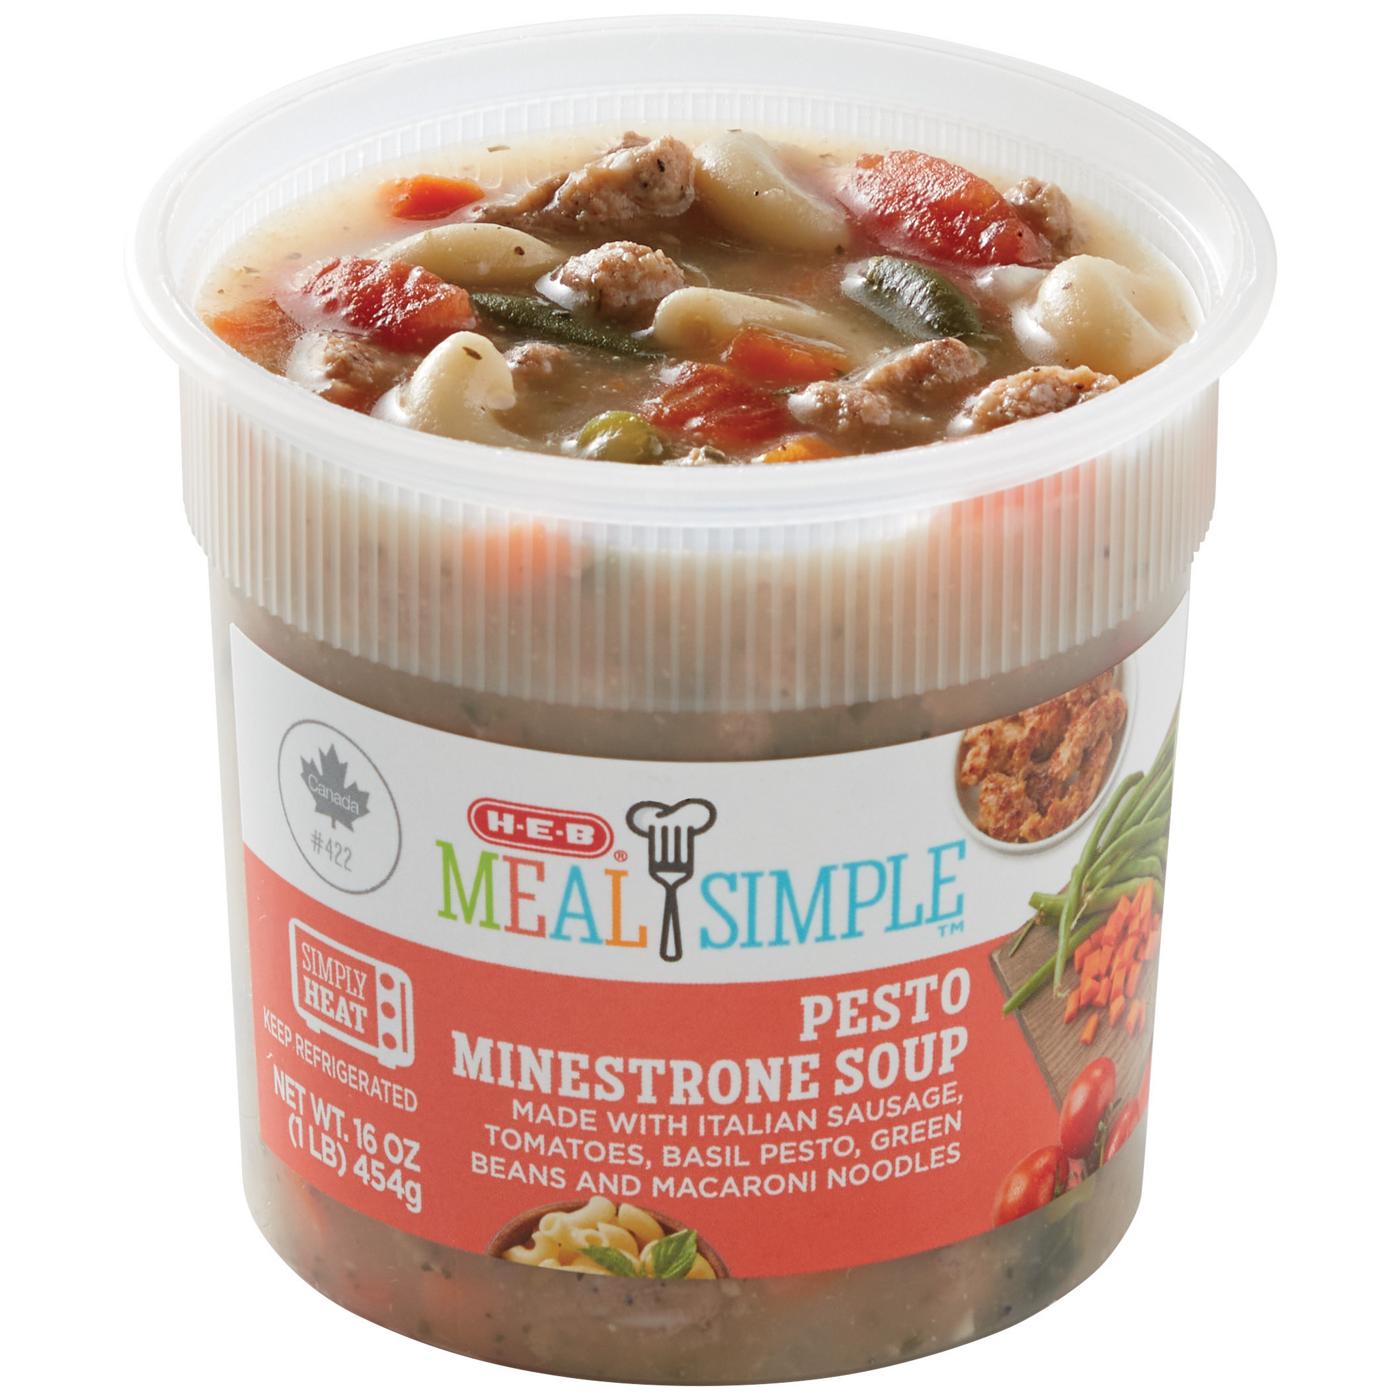 Meal Simple by H-E-B Pesto Minestrone Soup; image 1 of 2